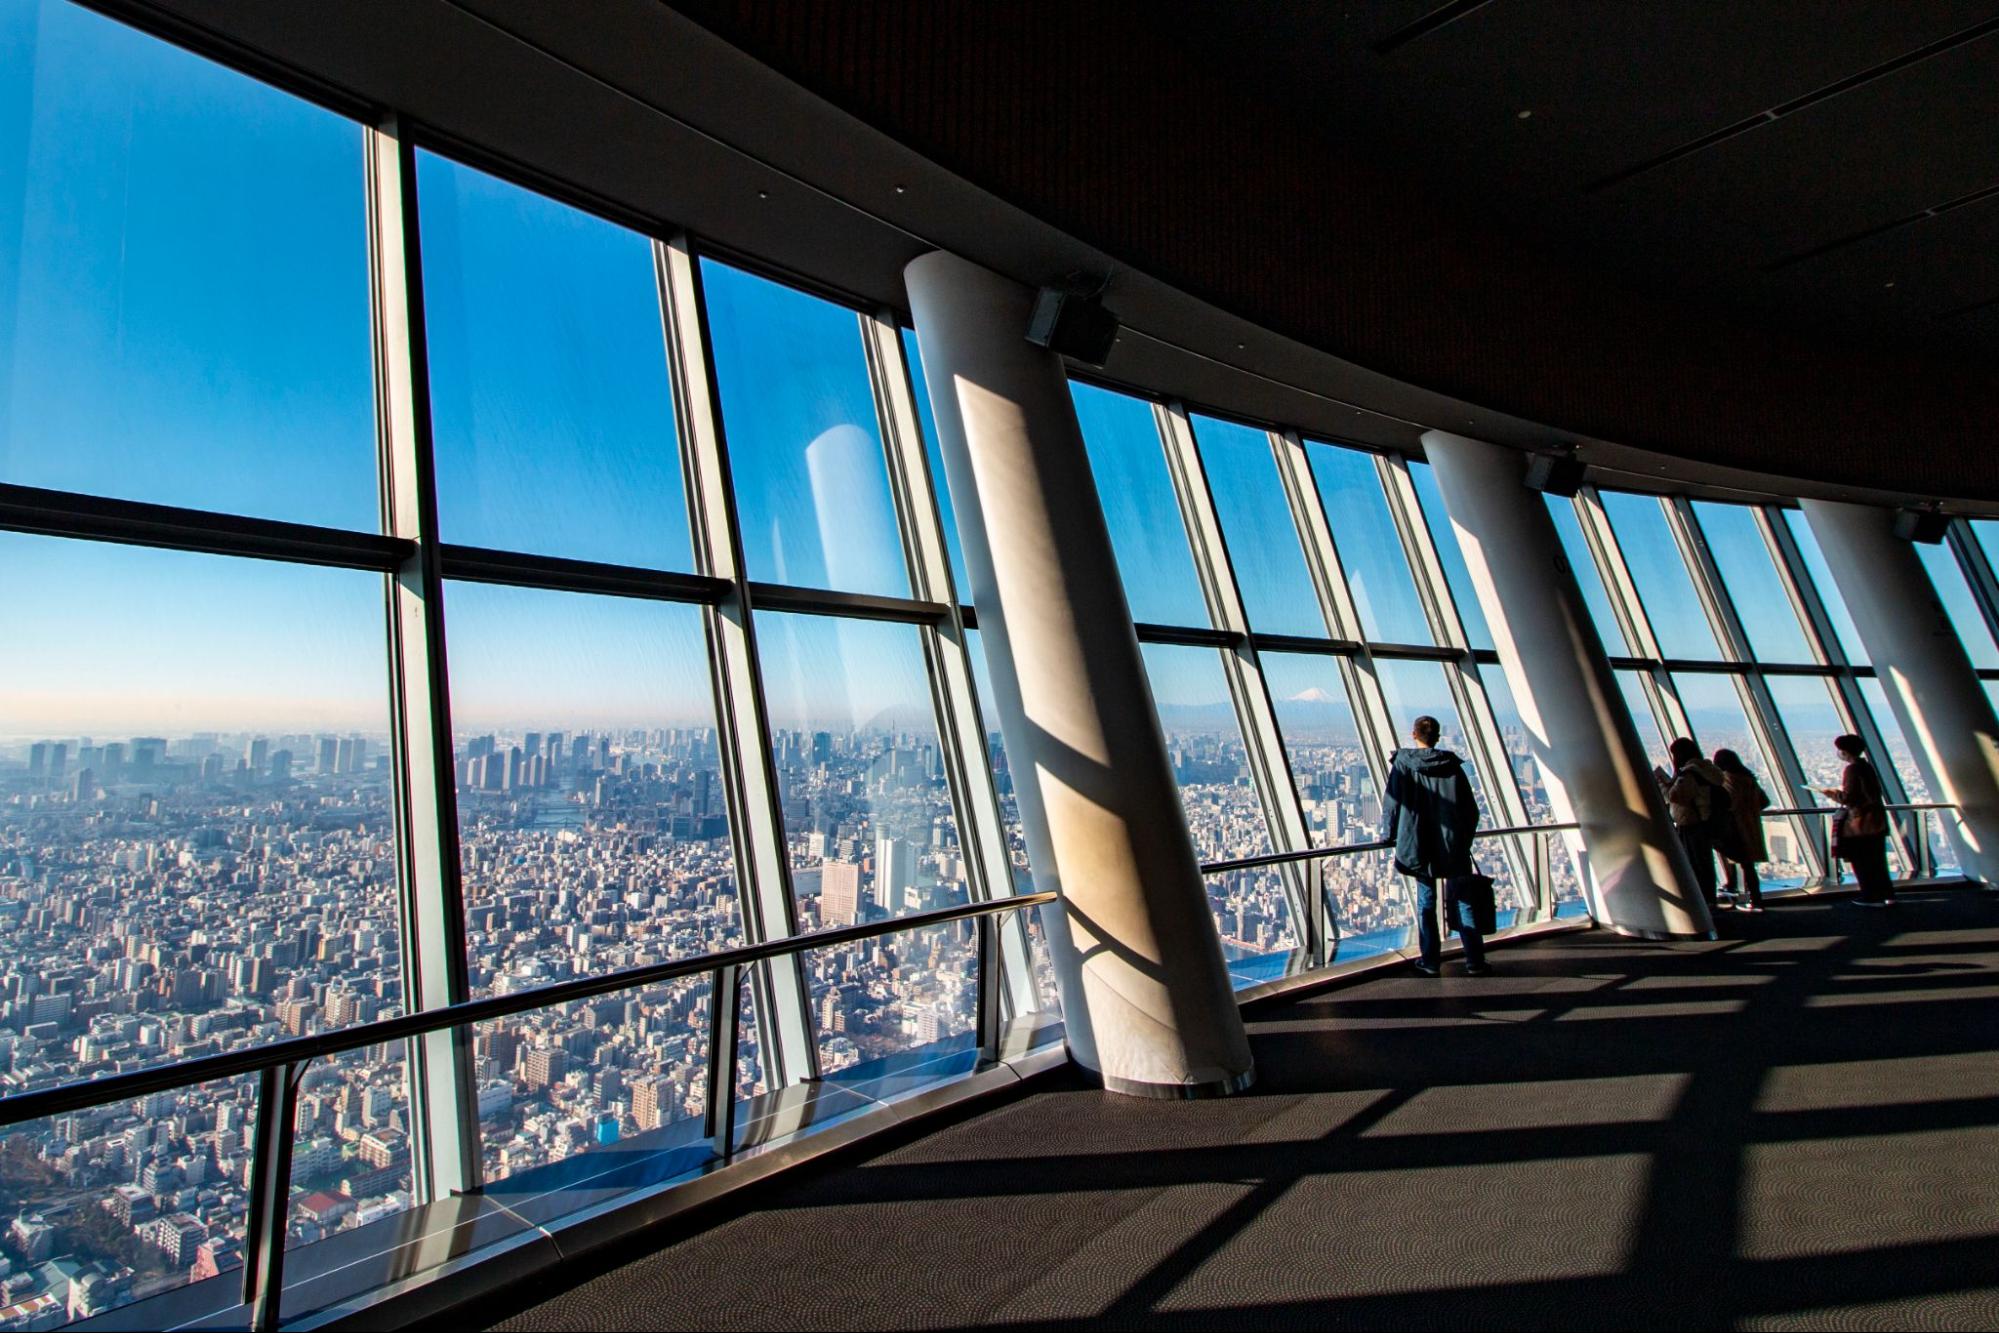 Tembo Deck In The Tokyo Skytree - Things To Do In Asakusa